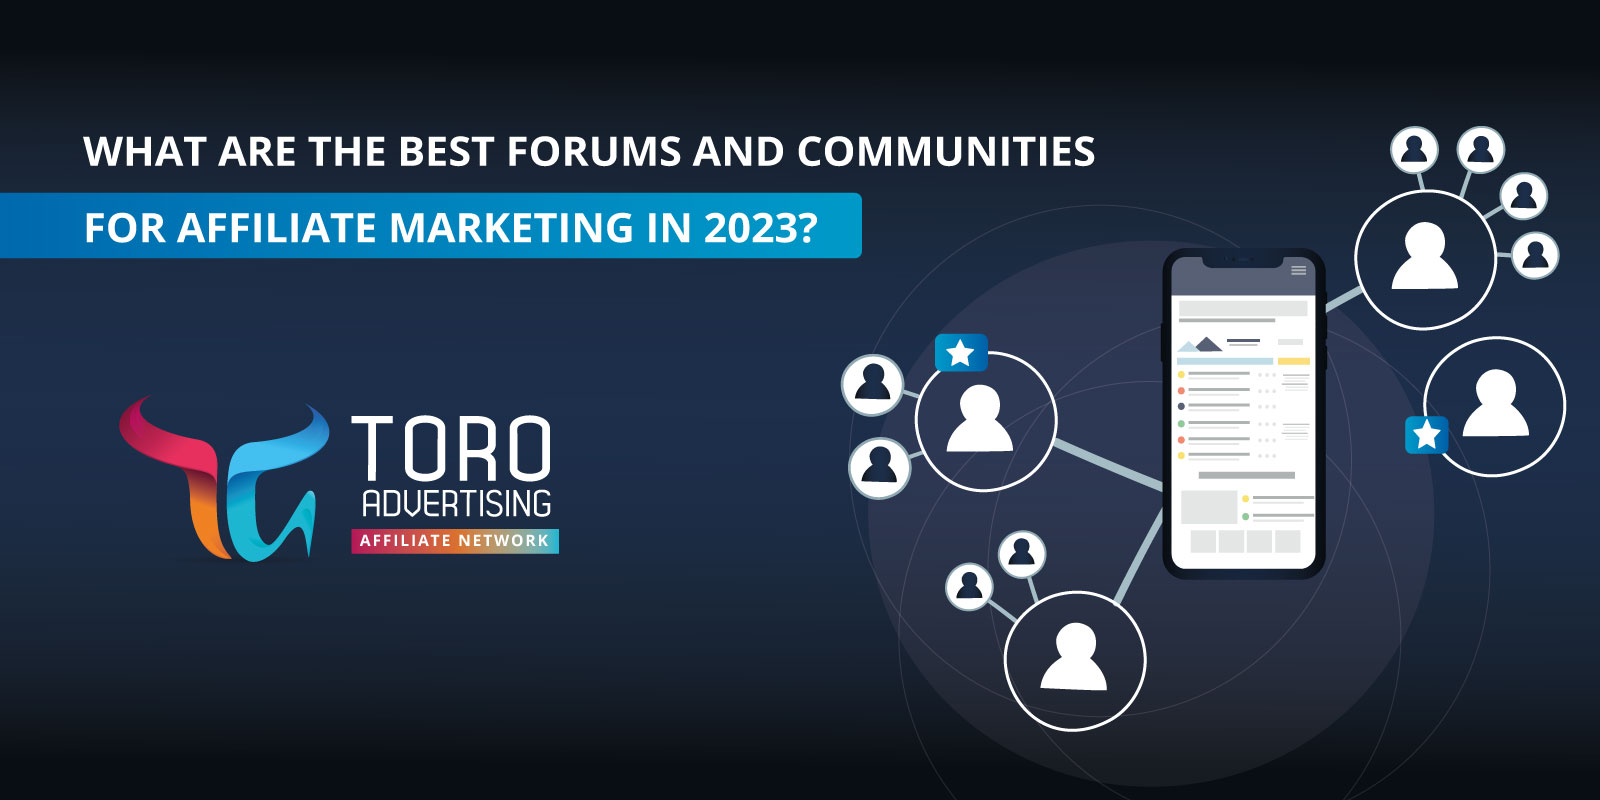 What are the best forums and communities for affiliate marketing in 2023?